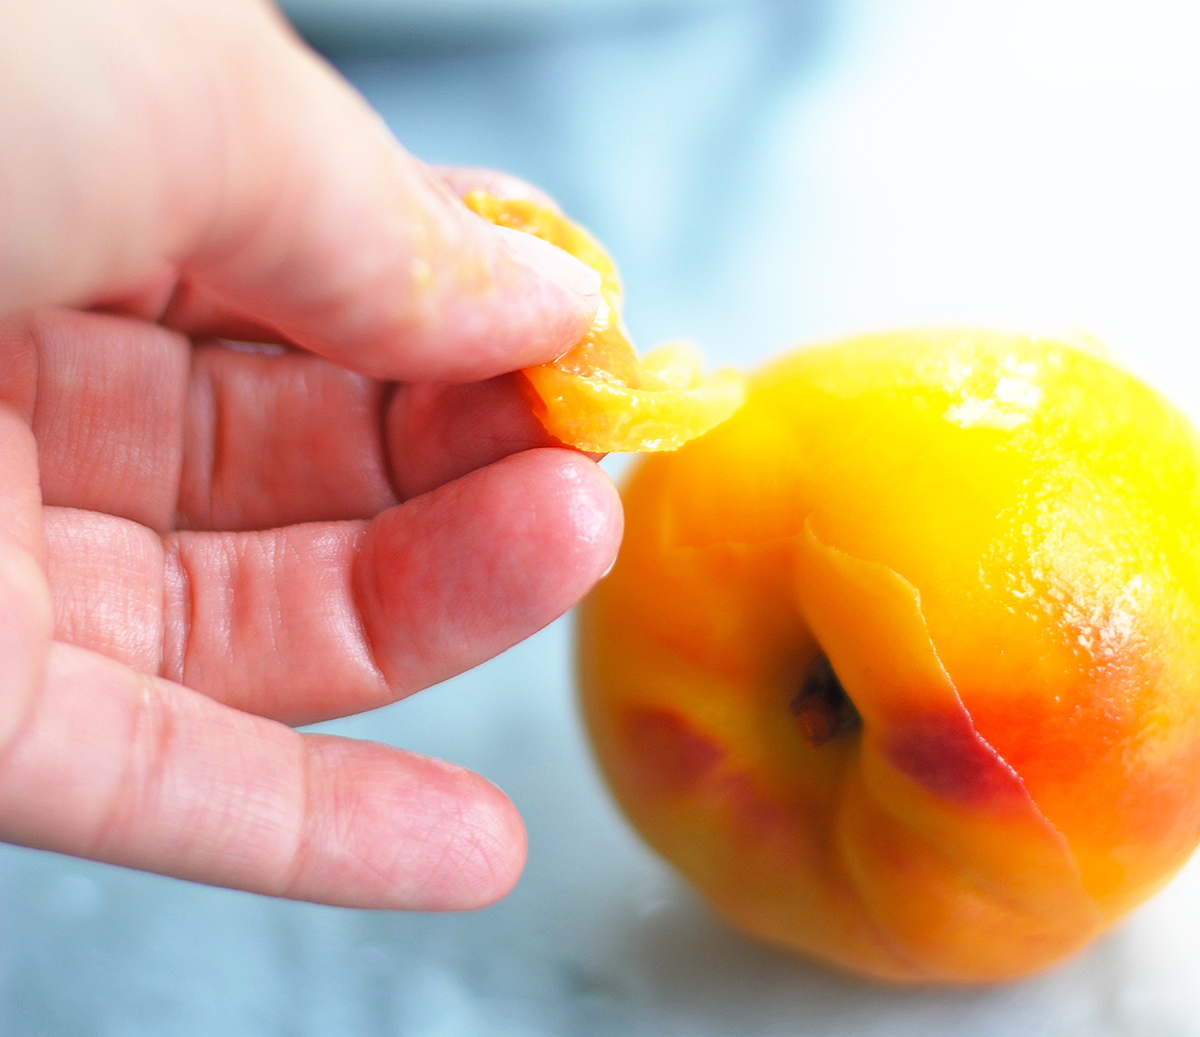 peeling the skin off a peach with hands